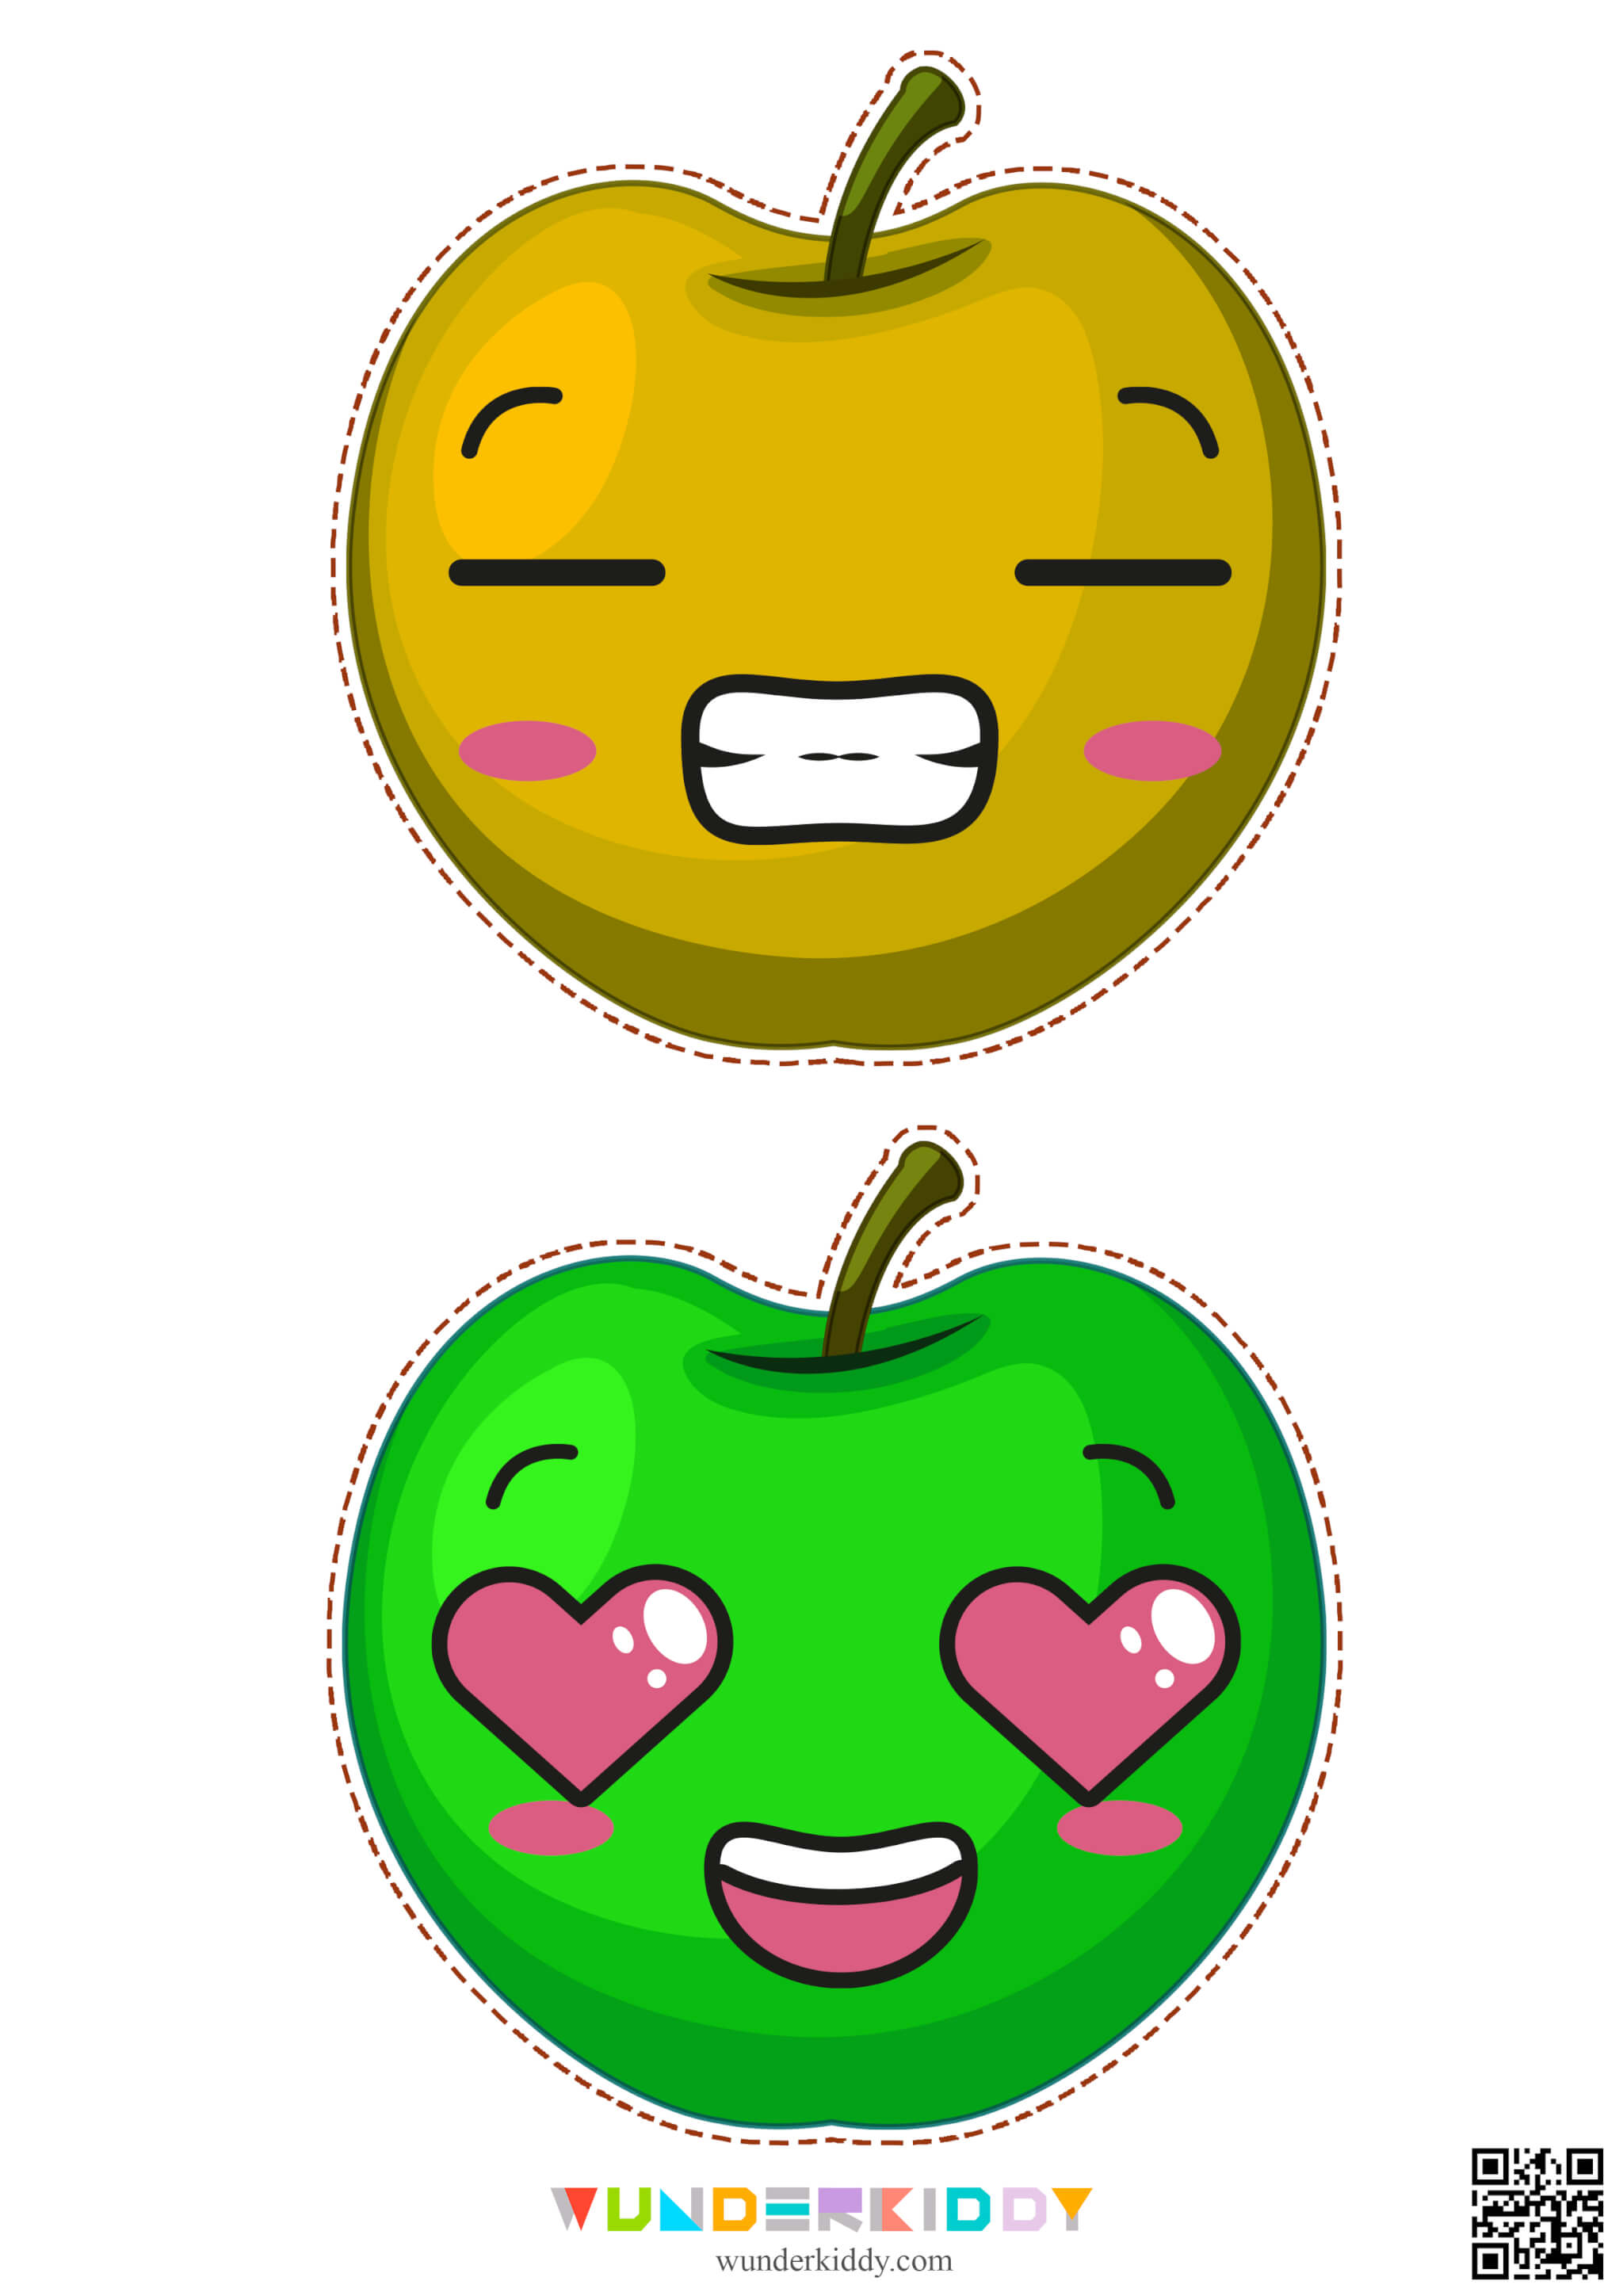 Template «Apples» - Image 7